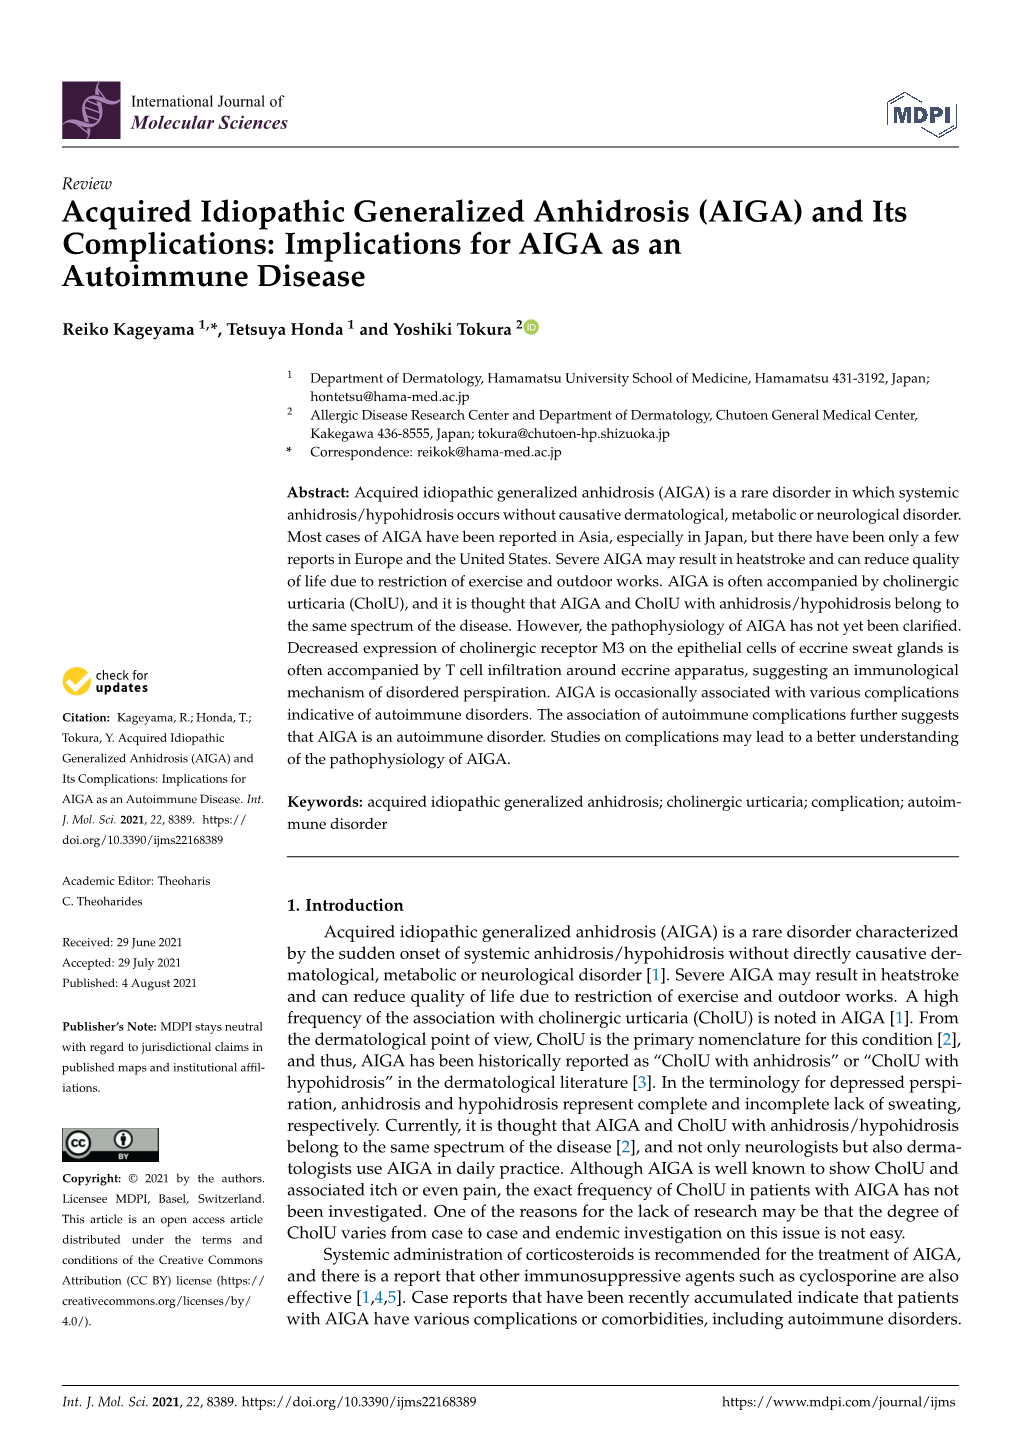 Acquired Idiopathic Generalized Anhidrosis (AIGA) and Its Complications: Implications for AIGA As an Autoimmune Disease